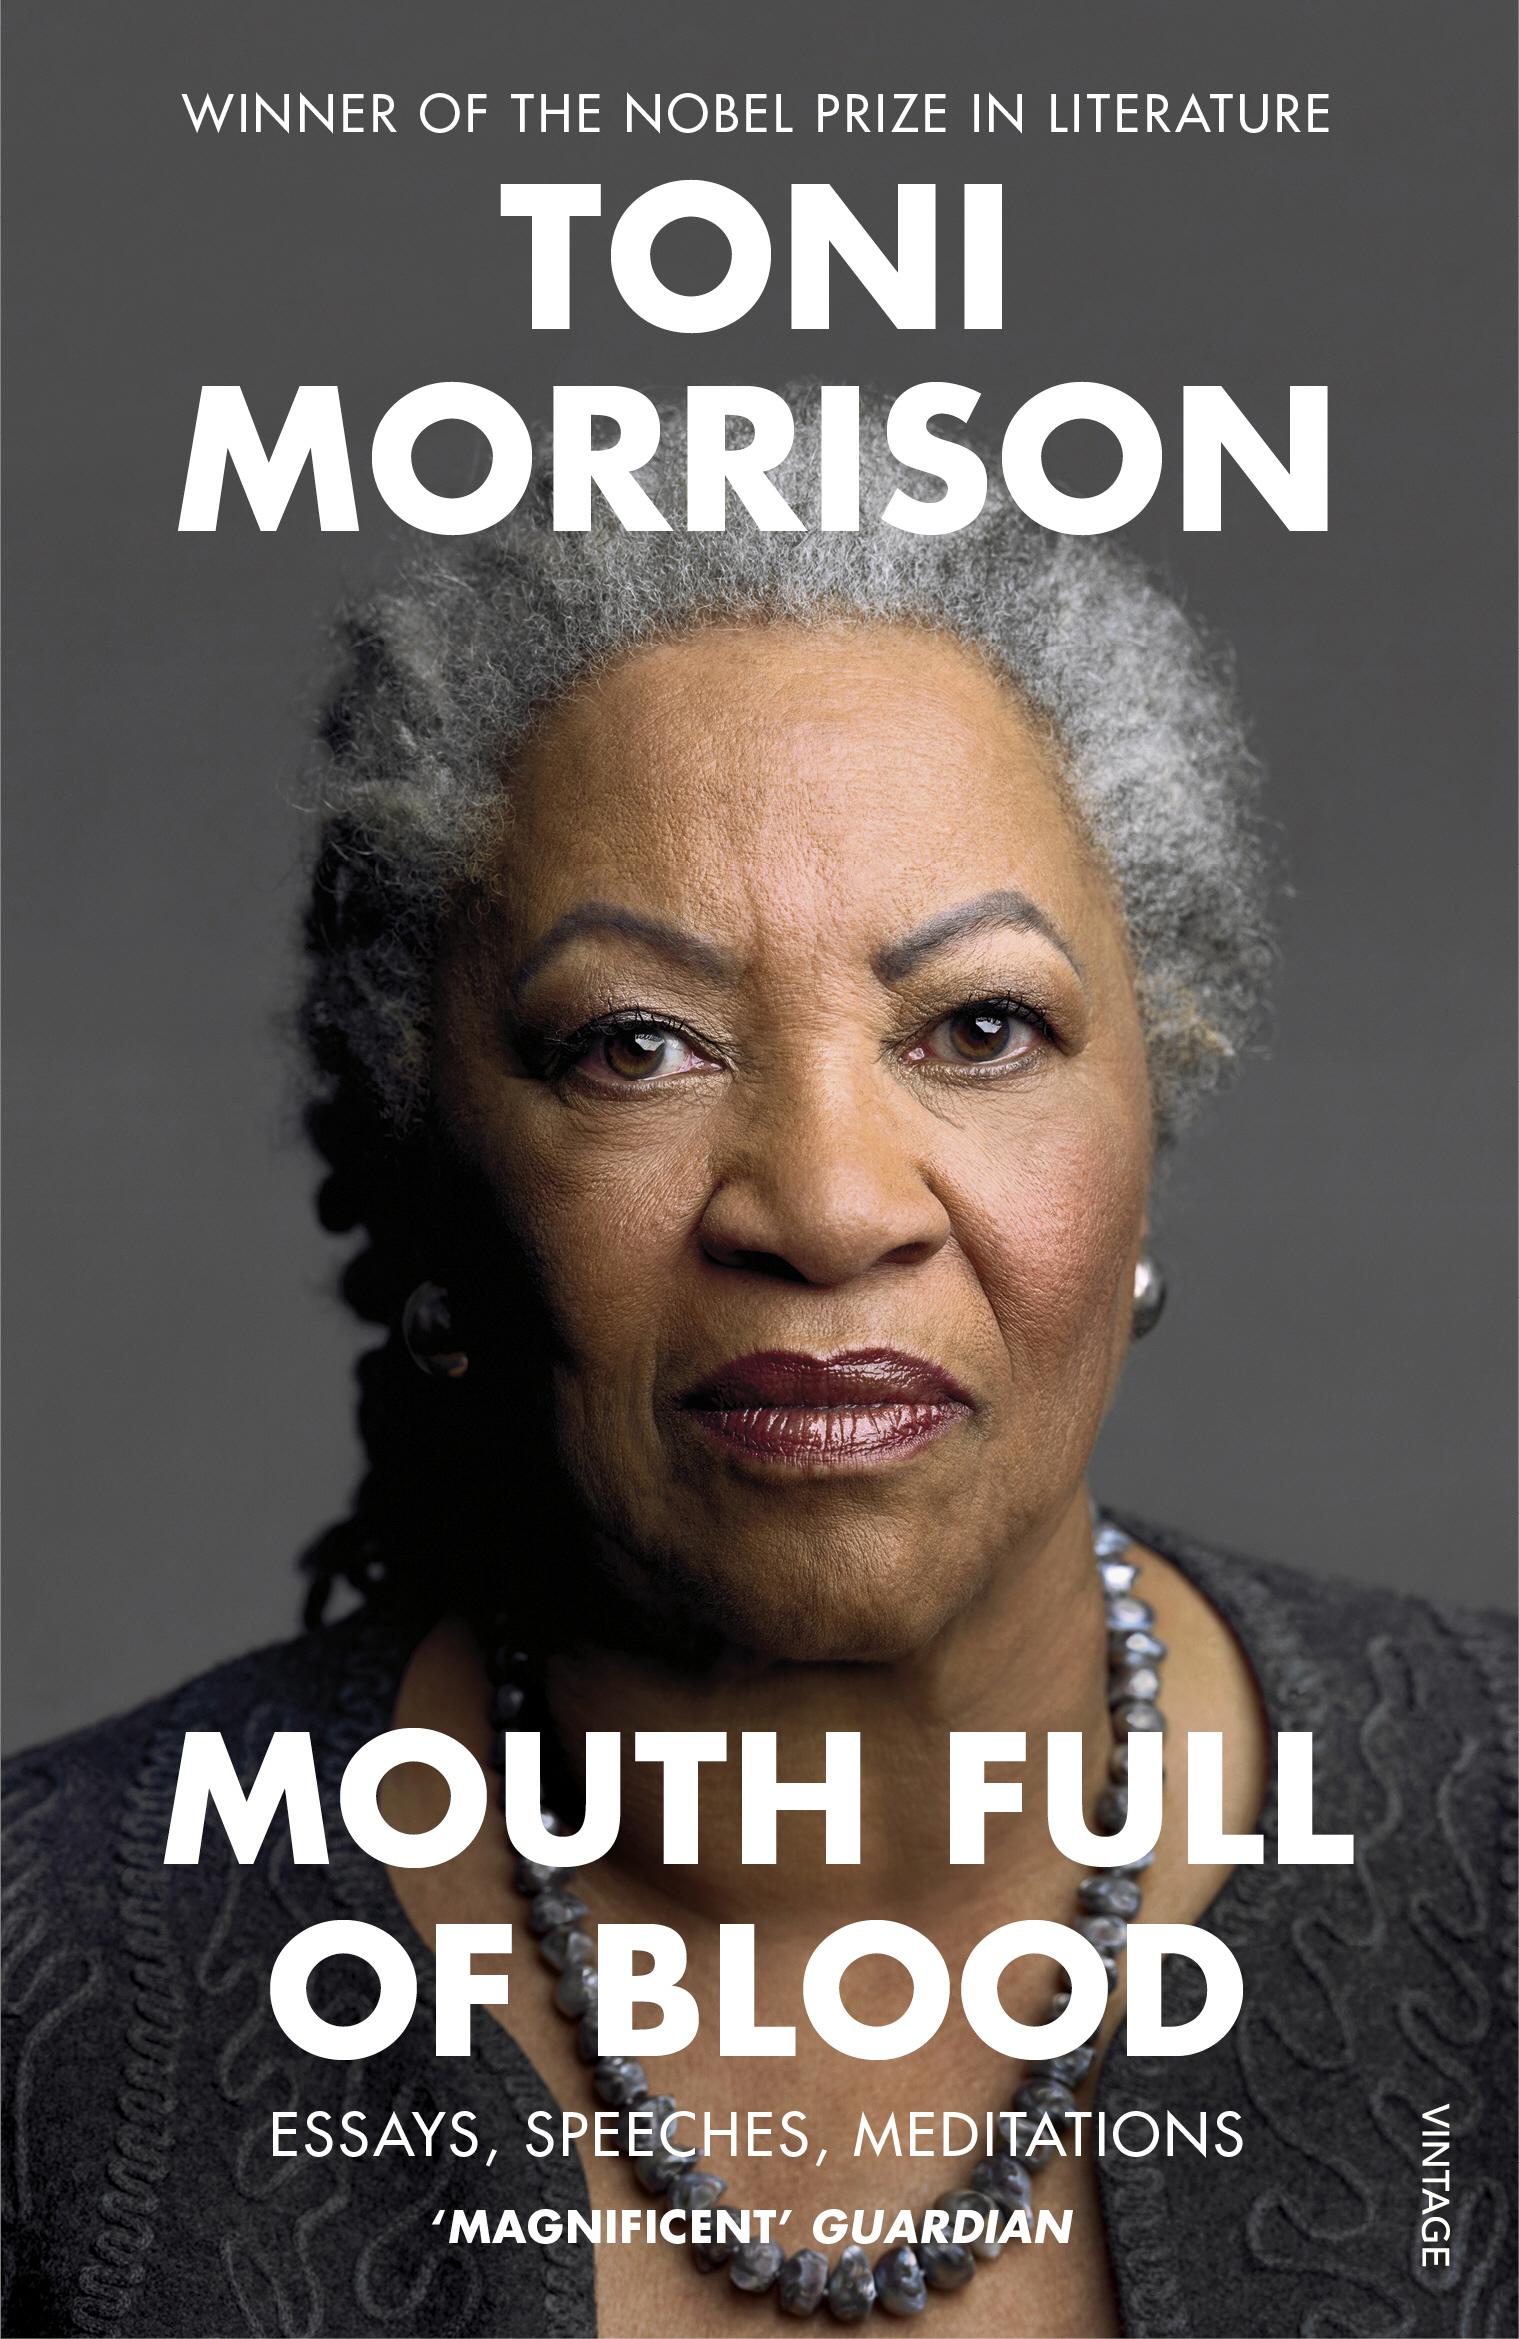 Mouth Full of Blood: Essays, Speeches, Meditations